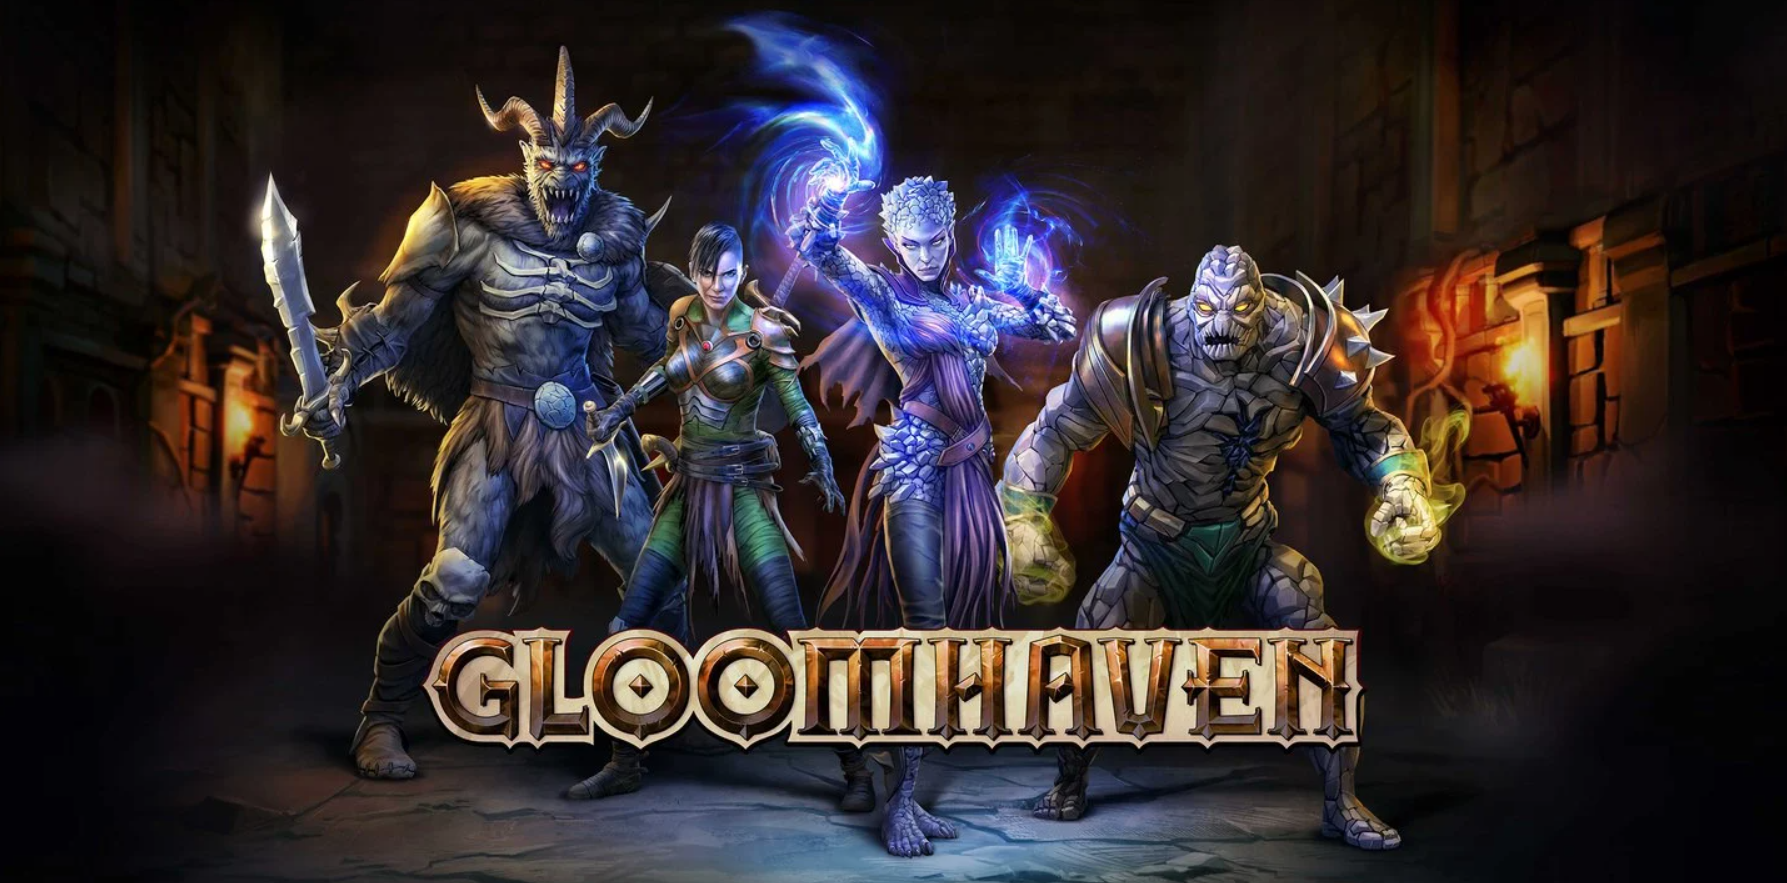 Gloomhaven by Flaming Fowl Studios